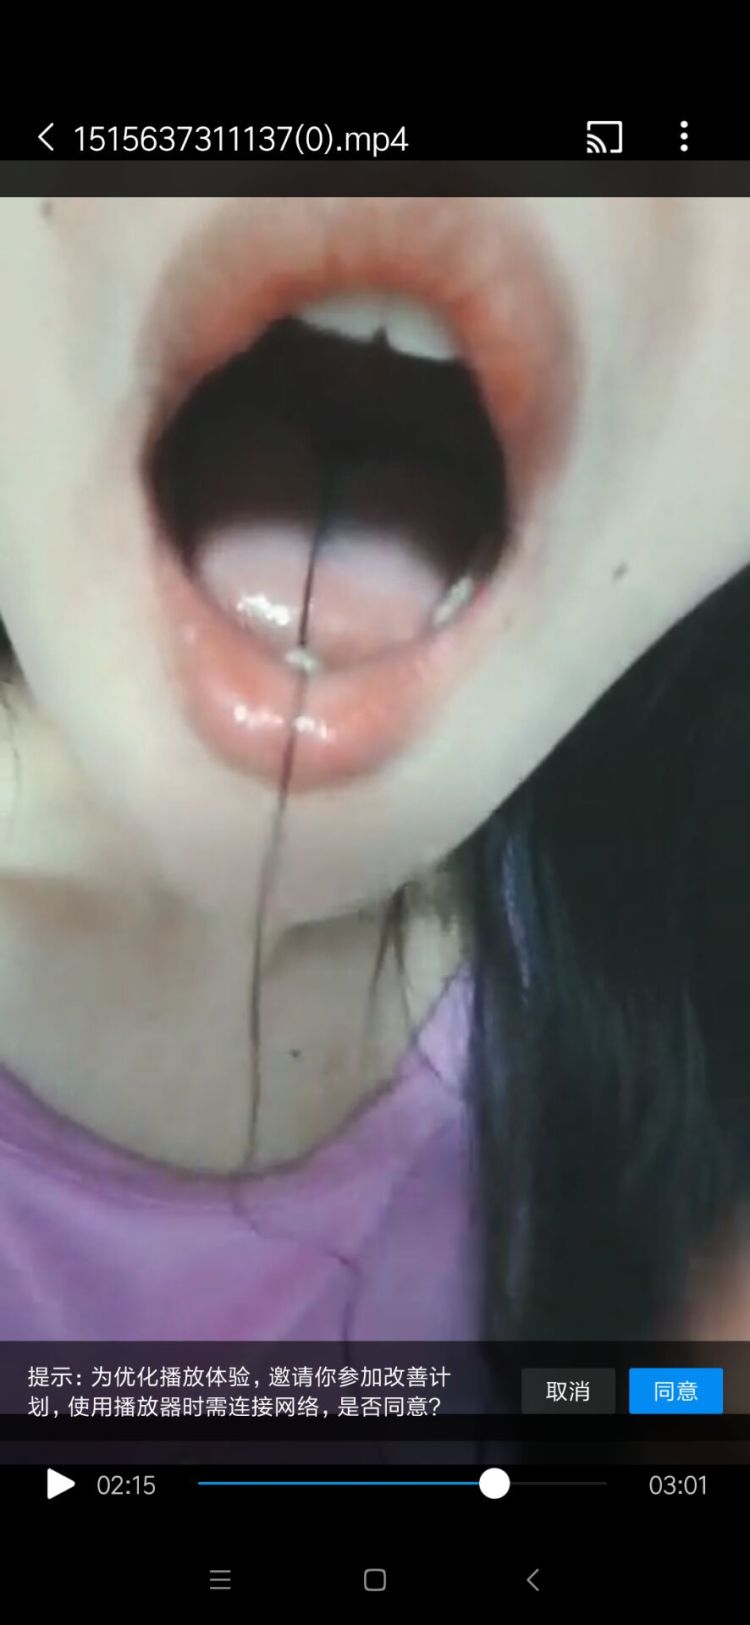 Swallow vore Chinese - ThisVid.com